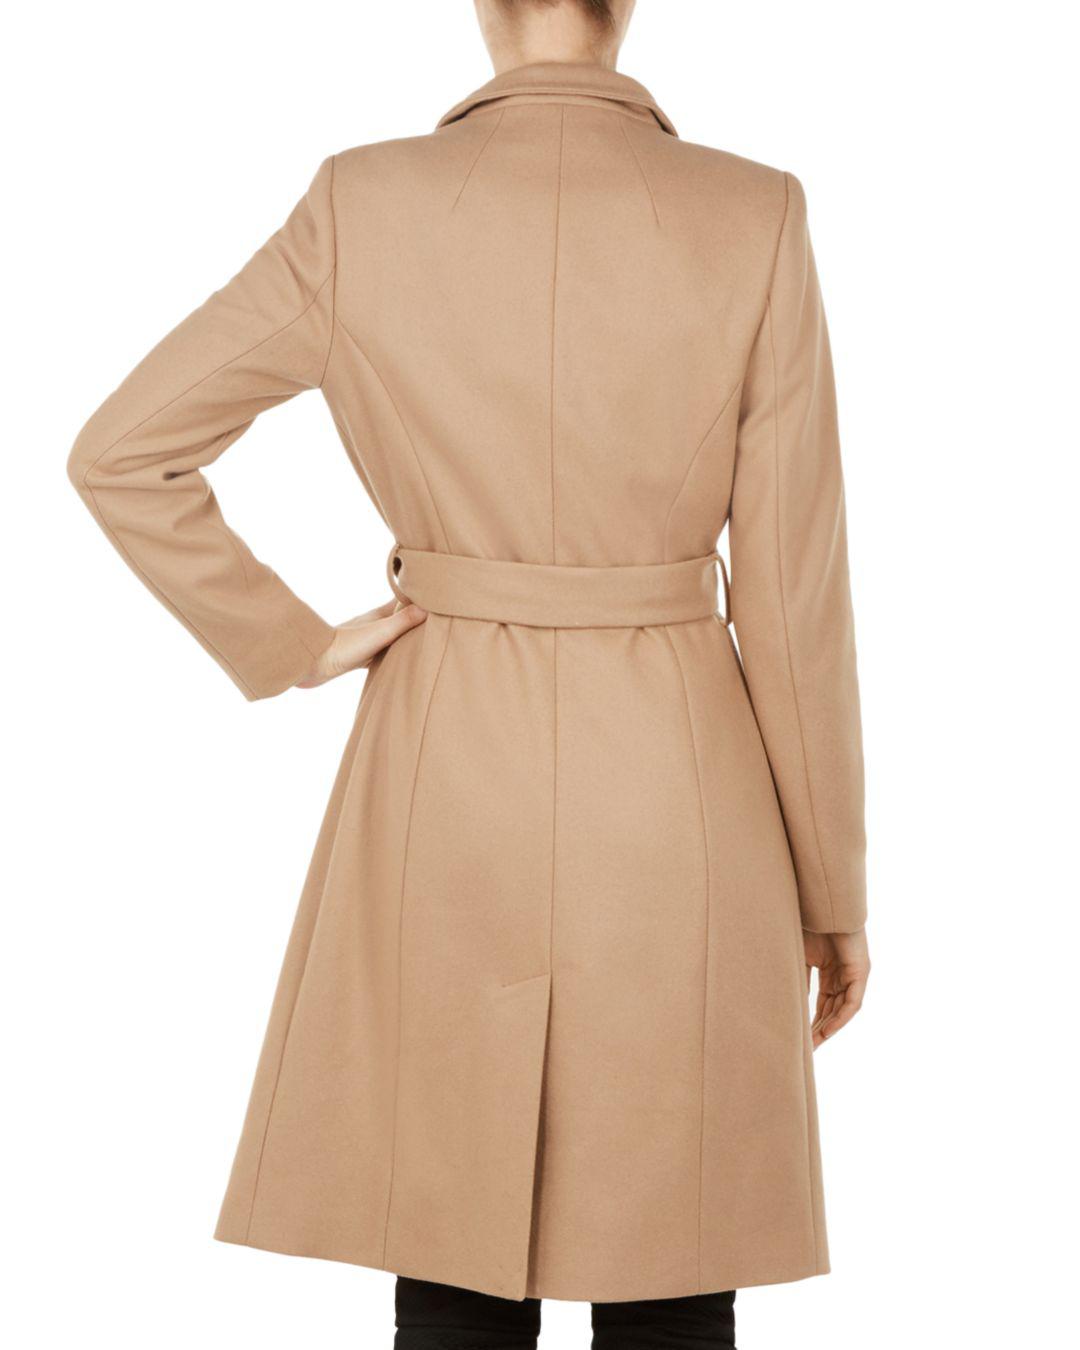 Ted Baker Sandra Wool Coat Camel - Ted's iconic camel coats are here ...